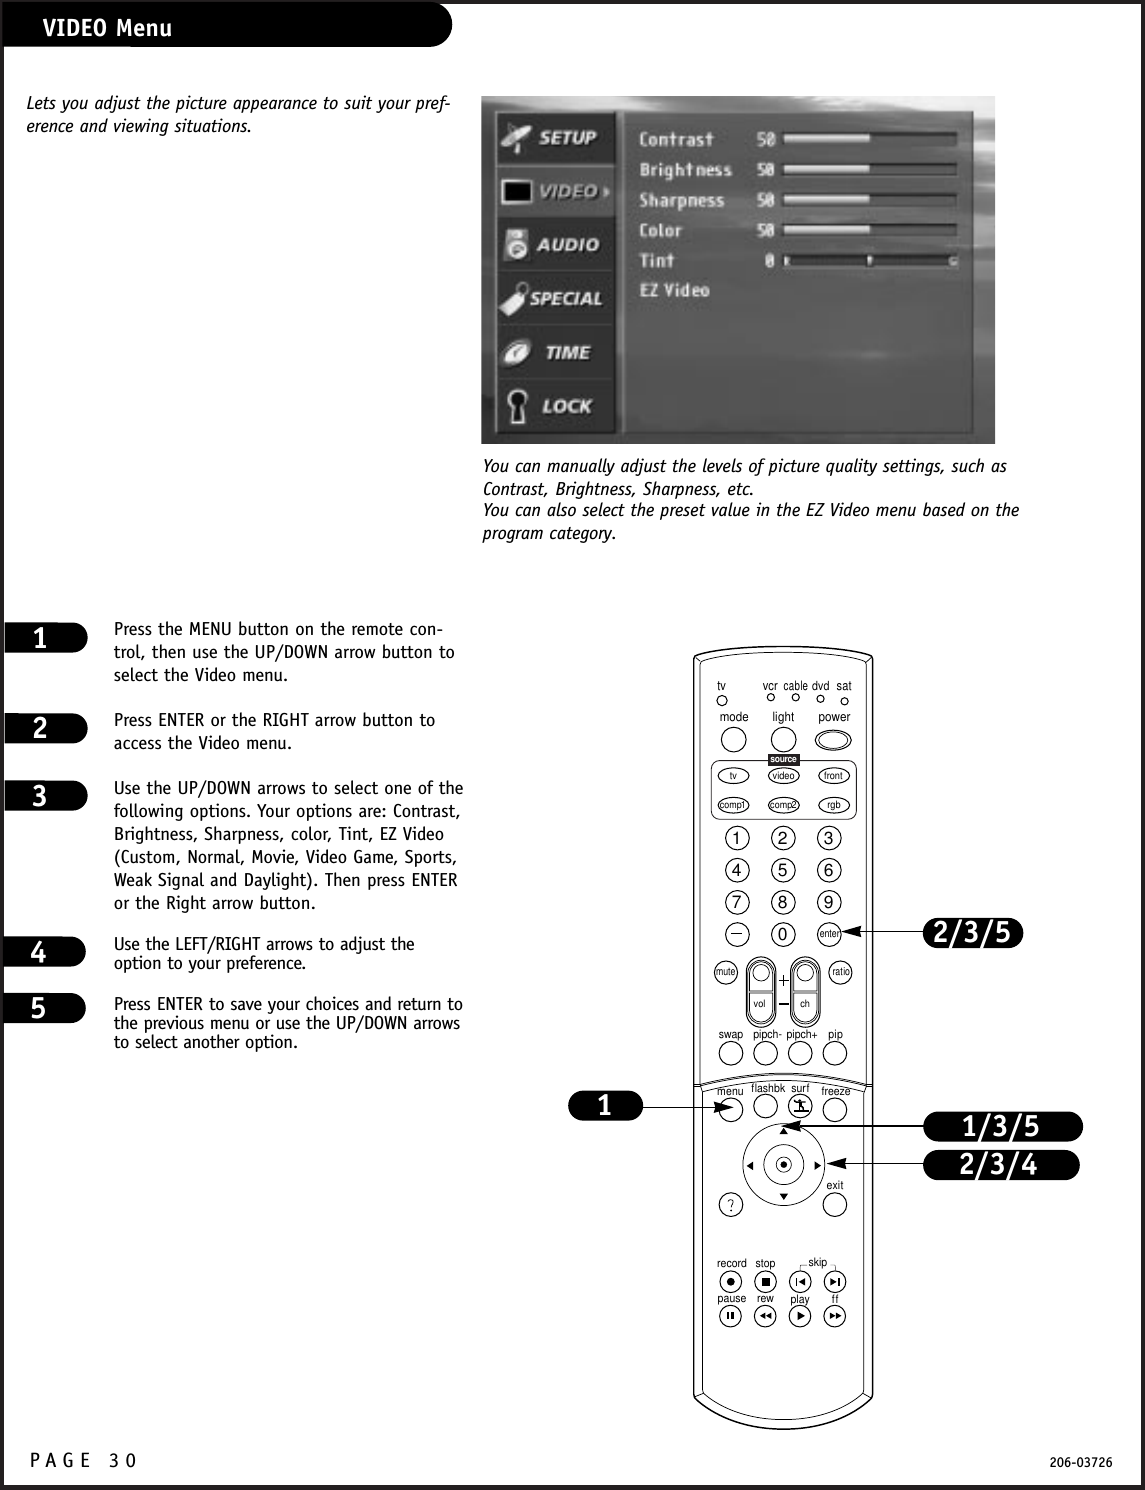 P A GE 30 206-03726VIDEO MenuPress the MENU button on the remote con-trol, then use the UP/DOWN arrow button toselect the Video menu. Press ENTER or the RIGHT arrow button toaccess the Video menu.Use the UP/DOWN arrows to select one of thefollowing options. Your options are: Contrast,Brightness, Sharpness, color, Tint, EZ Video(Custom, Normal, Movie, Video Game, Sports,Weak Signal and Daylight). Then press ENTERor the Right arrow button.Use the LEFT/RIGHT arrows to adjust theoption to your preference.Press ENTER to save your choices and return tothe previous menu or use the UP/DOWN arrowsto select another option.1231234567890tvmode light power   tv video frontcomp1 rgbvcrcabledvdsatmuteswap pipch- pipch+ pipmenurecord stoppause rew play ffexitflashbk surf freezevol chratiocomp2skipsourceenter2/3/41/3/51You can manually adjust the levels of picture quality settings, such asContrast, Brightness, Sharpness, etc.Lets you adjust the picture appearance to suit your pref-erence and viewing situations.You can also select the preset value in the EZ Video menu based on theprogram category.2/3/545